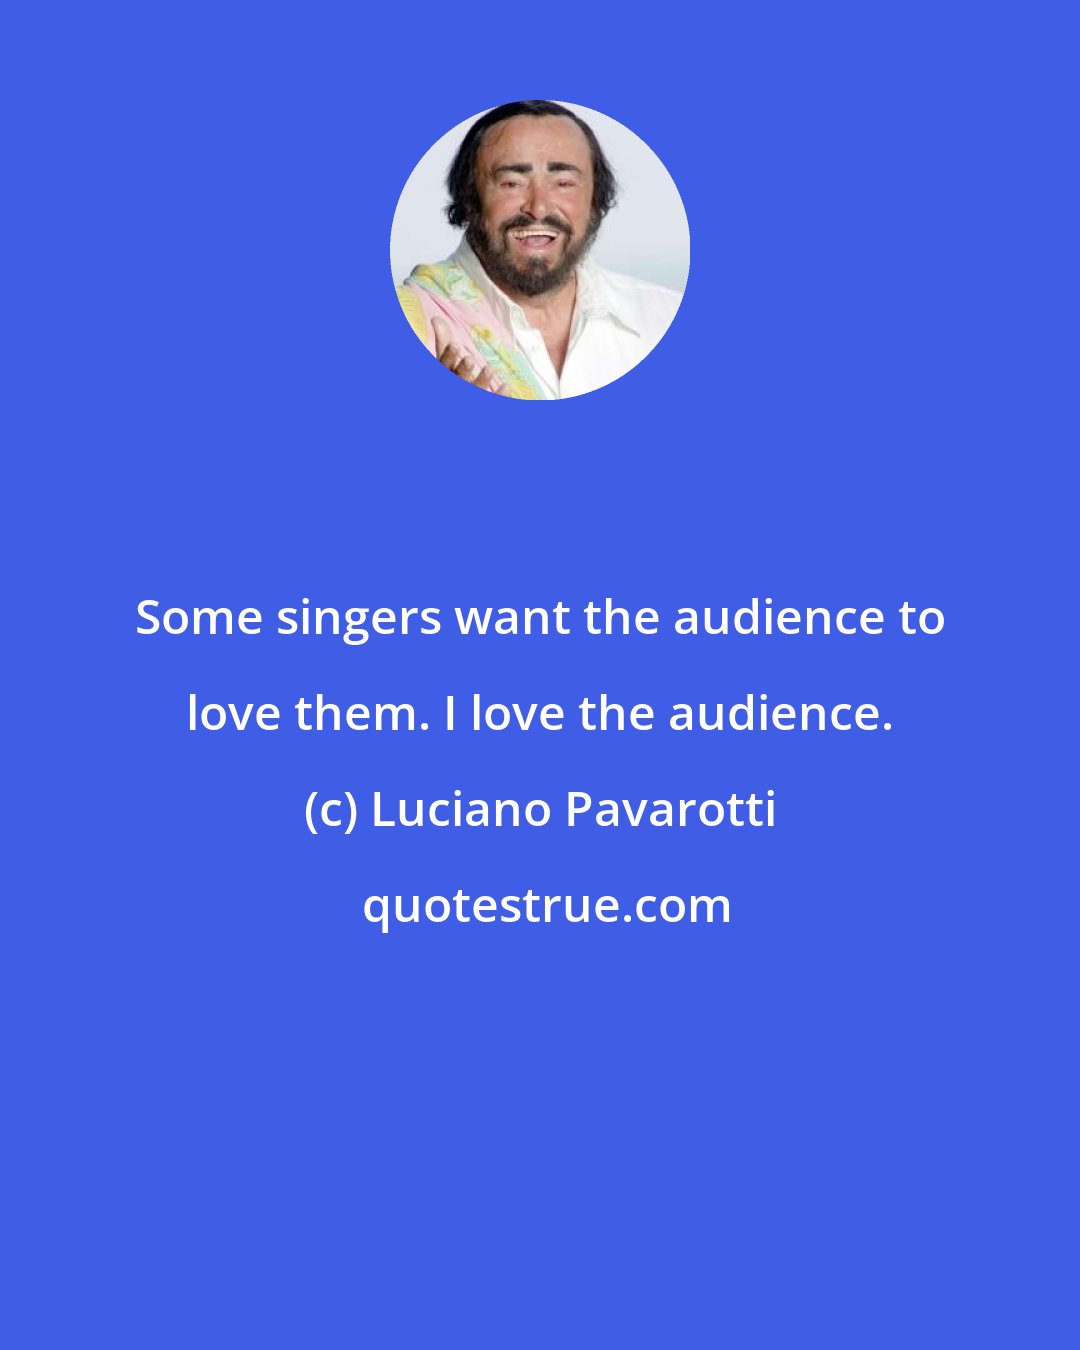 Luciano Pavarotti: Some singers want the audience to love them. I love the audience.